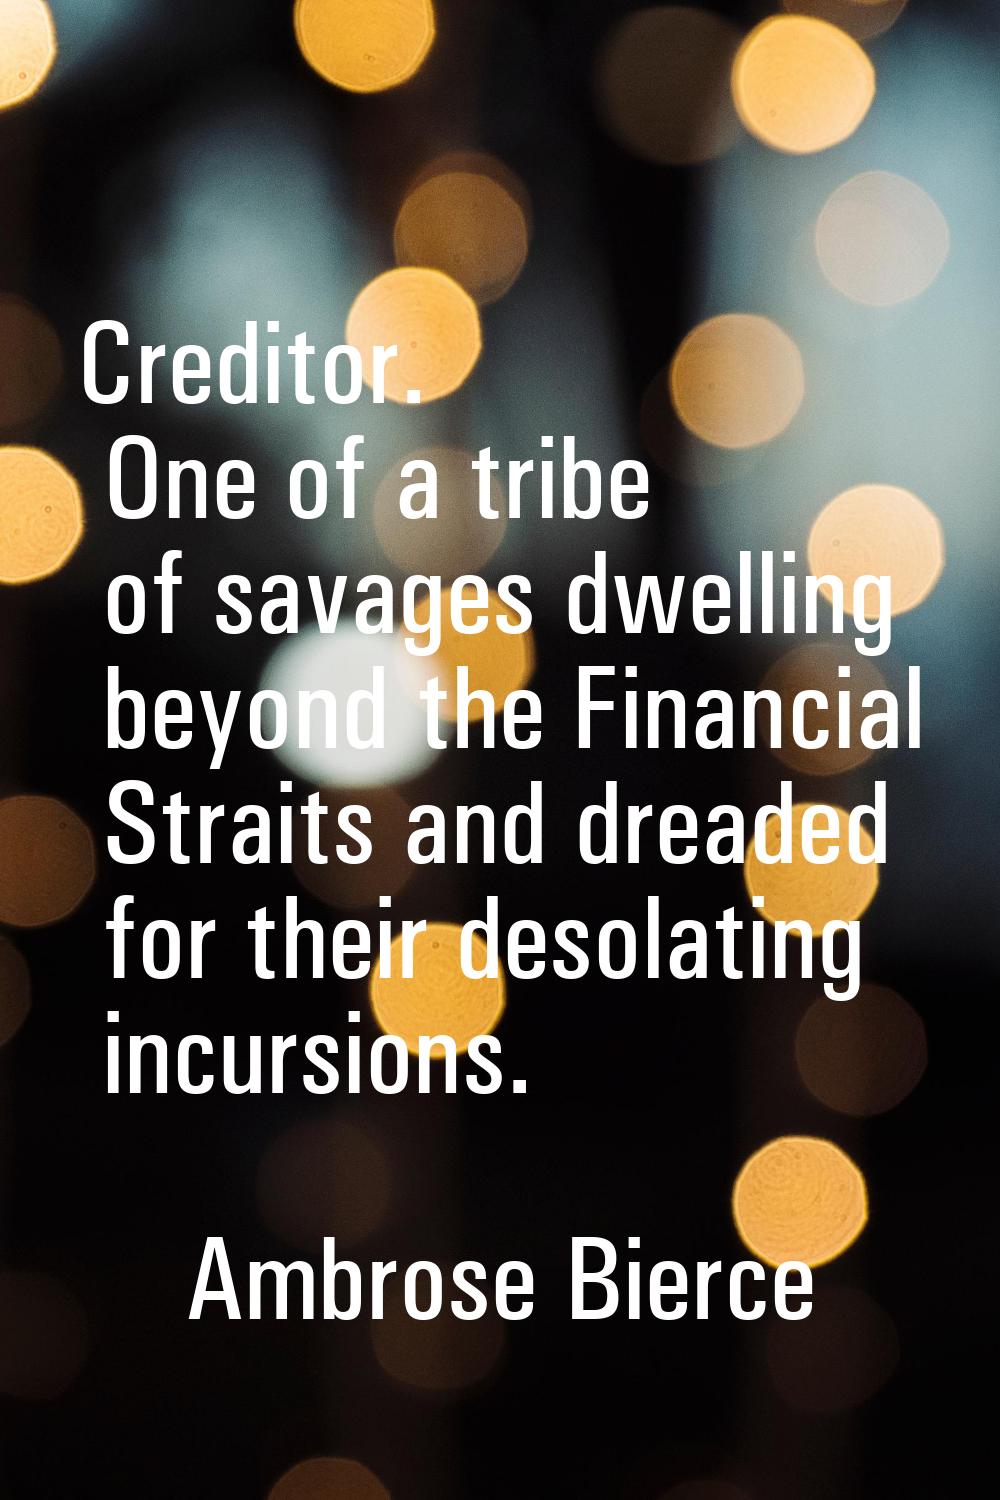 Creditor. One of a tribe of savages dwelling beyond the Financial Straits and dreaded for their des